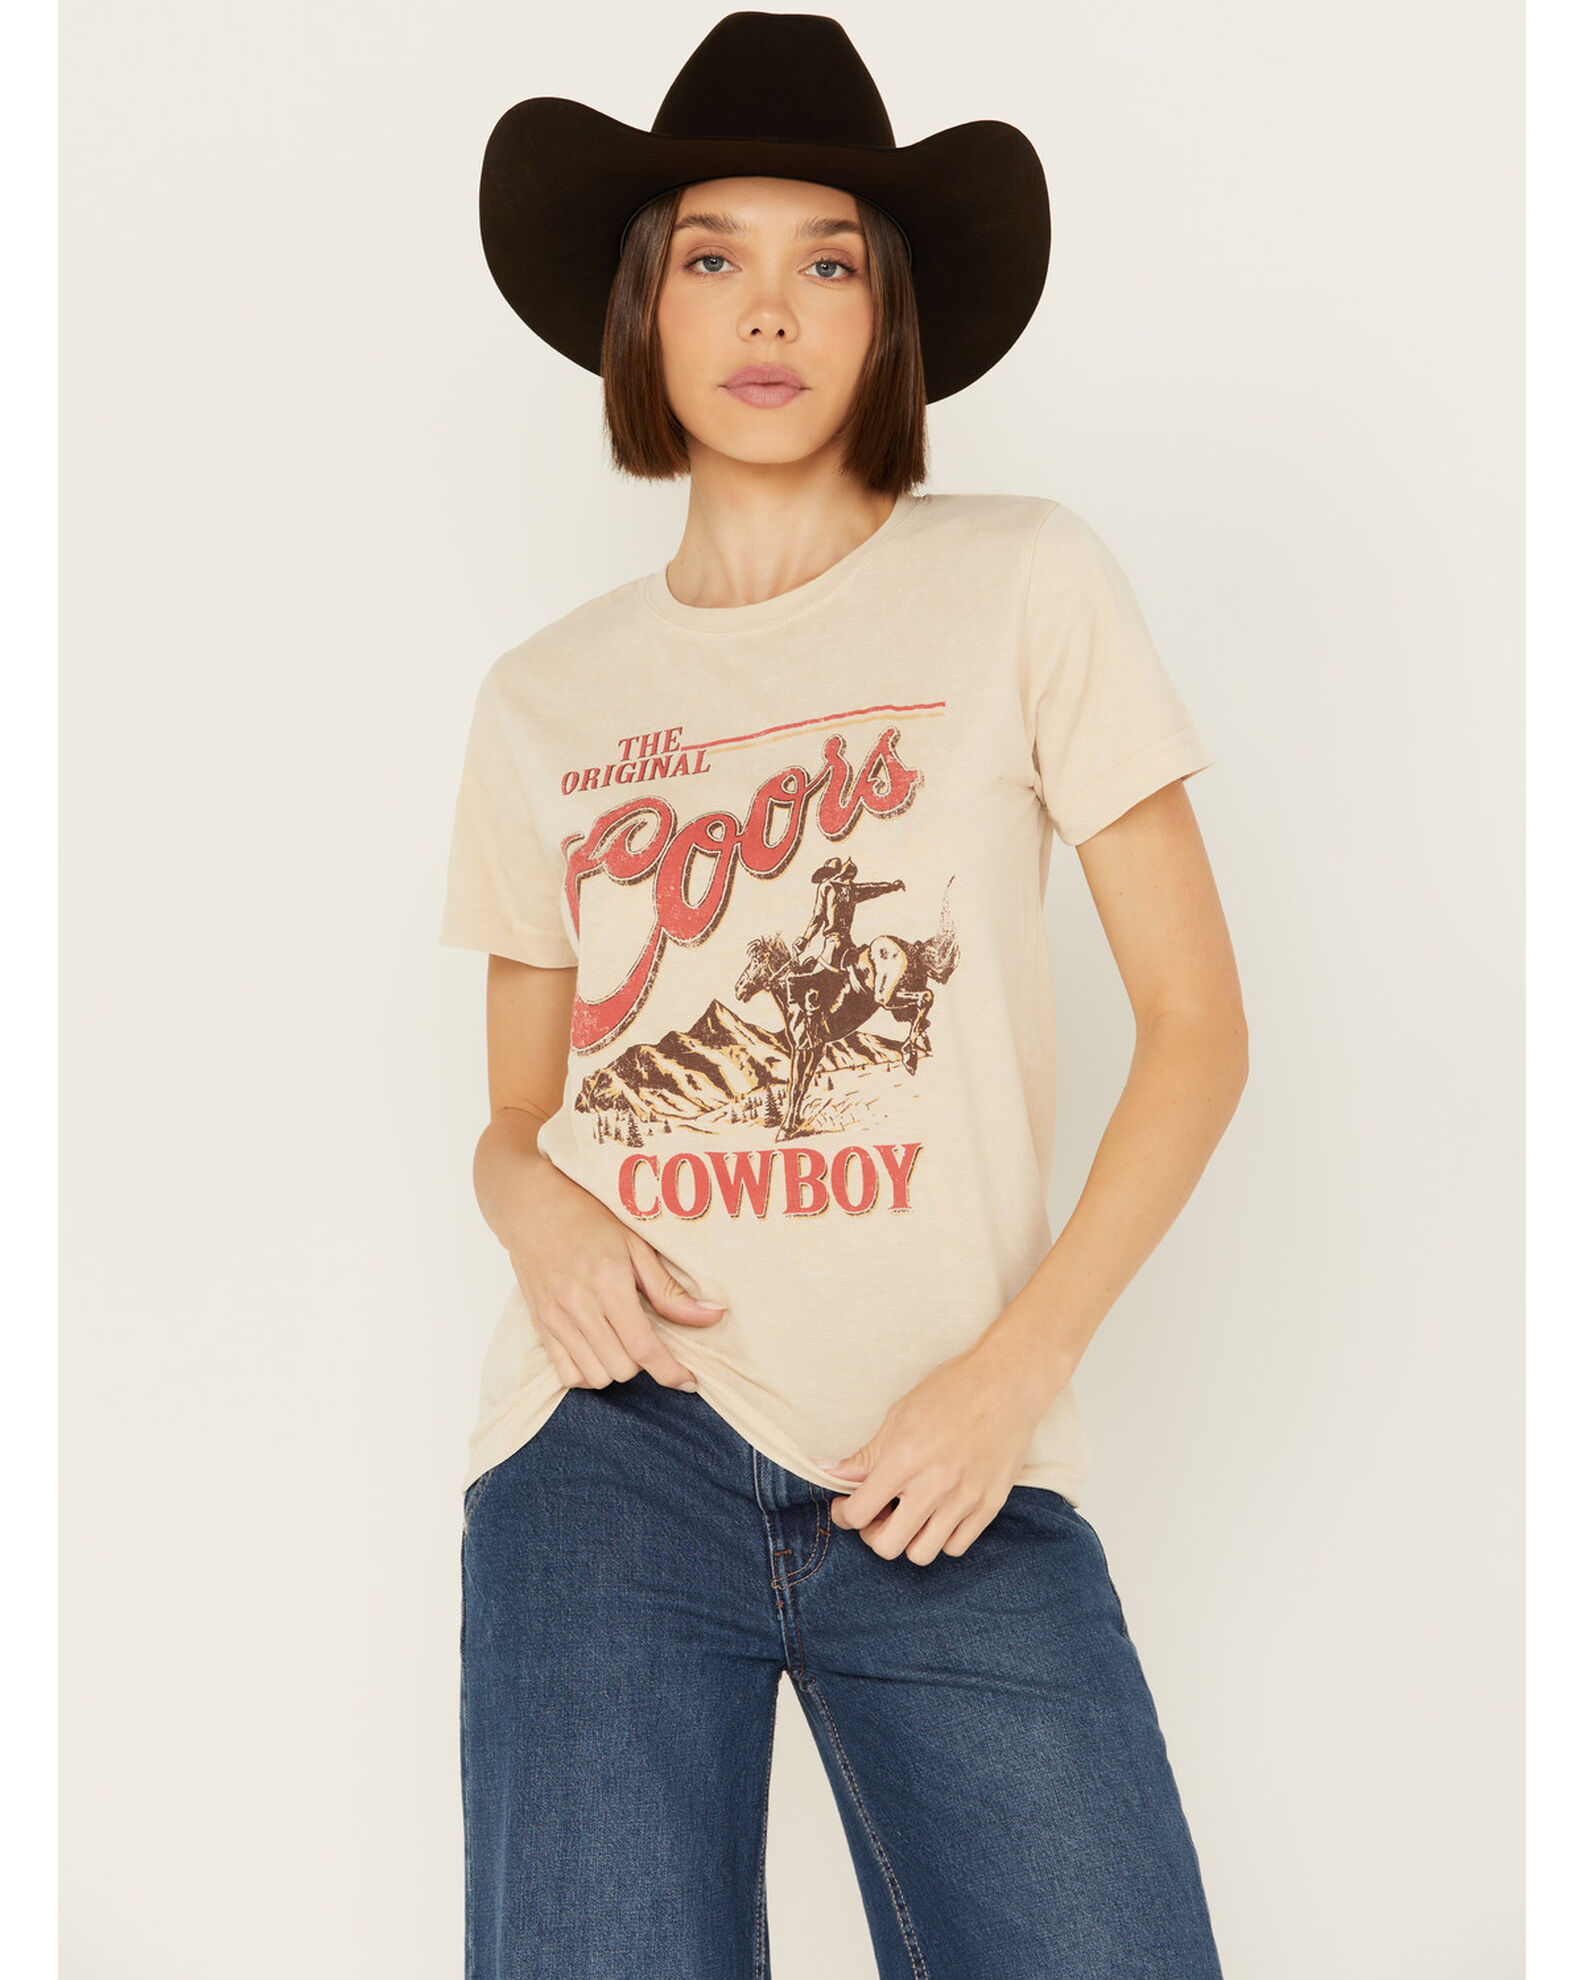 Changes Women's OG Coors Cowboy Short Sleeve Graphic Tee